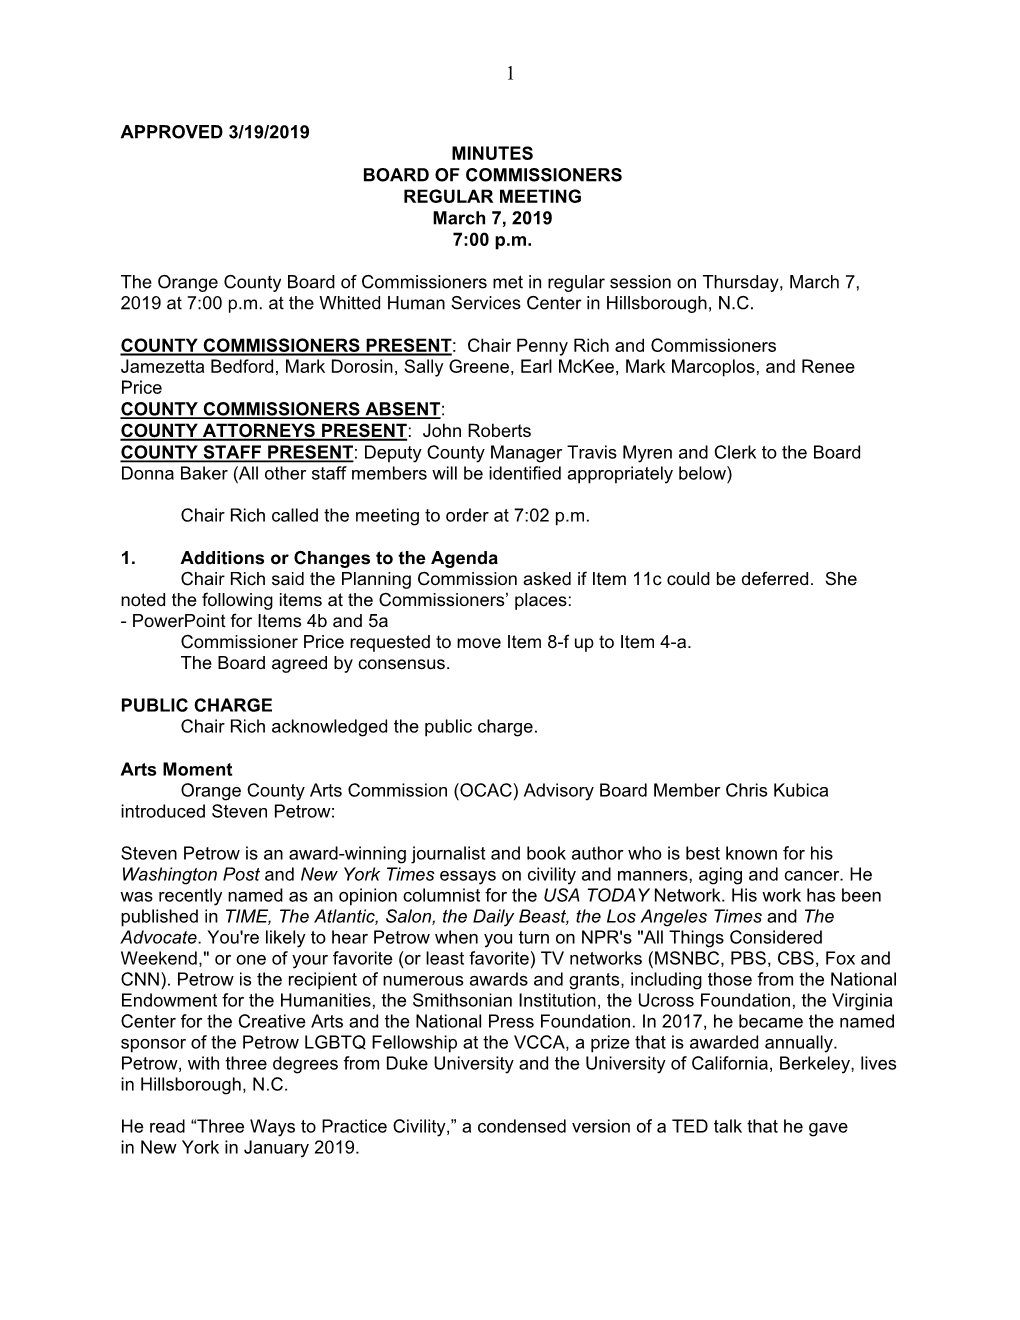 APPROVED 3/19/2019 MINUTES BOARD of COMMISSIONERS REGULAR MEETING March 7, 2019 7:00 P.M